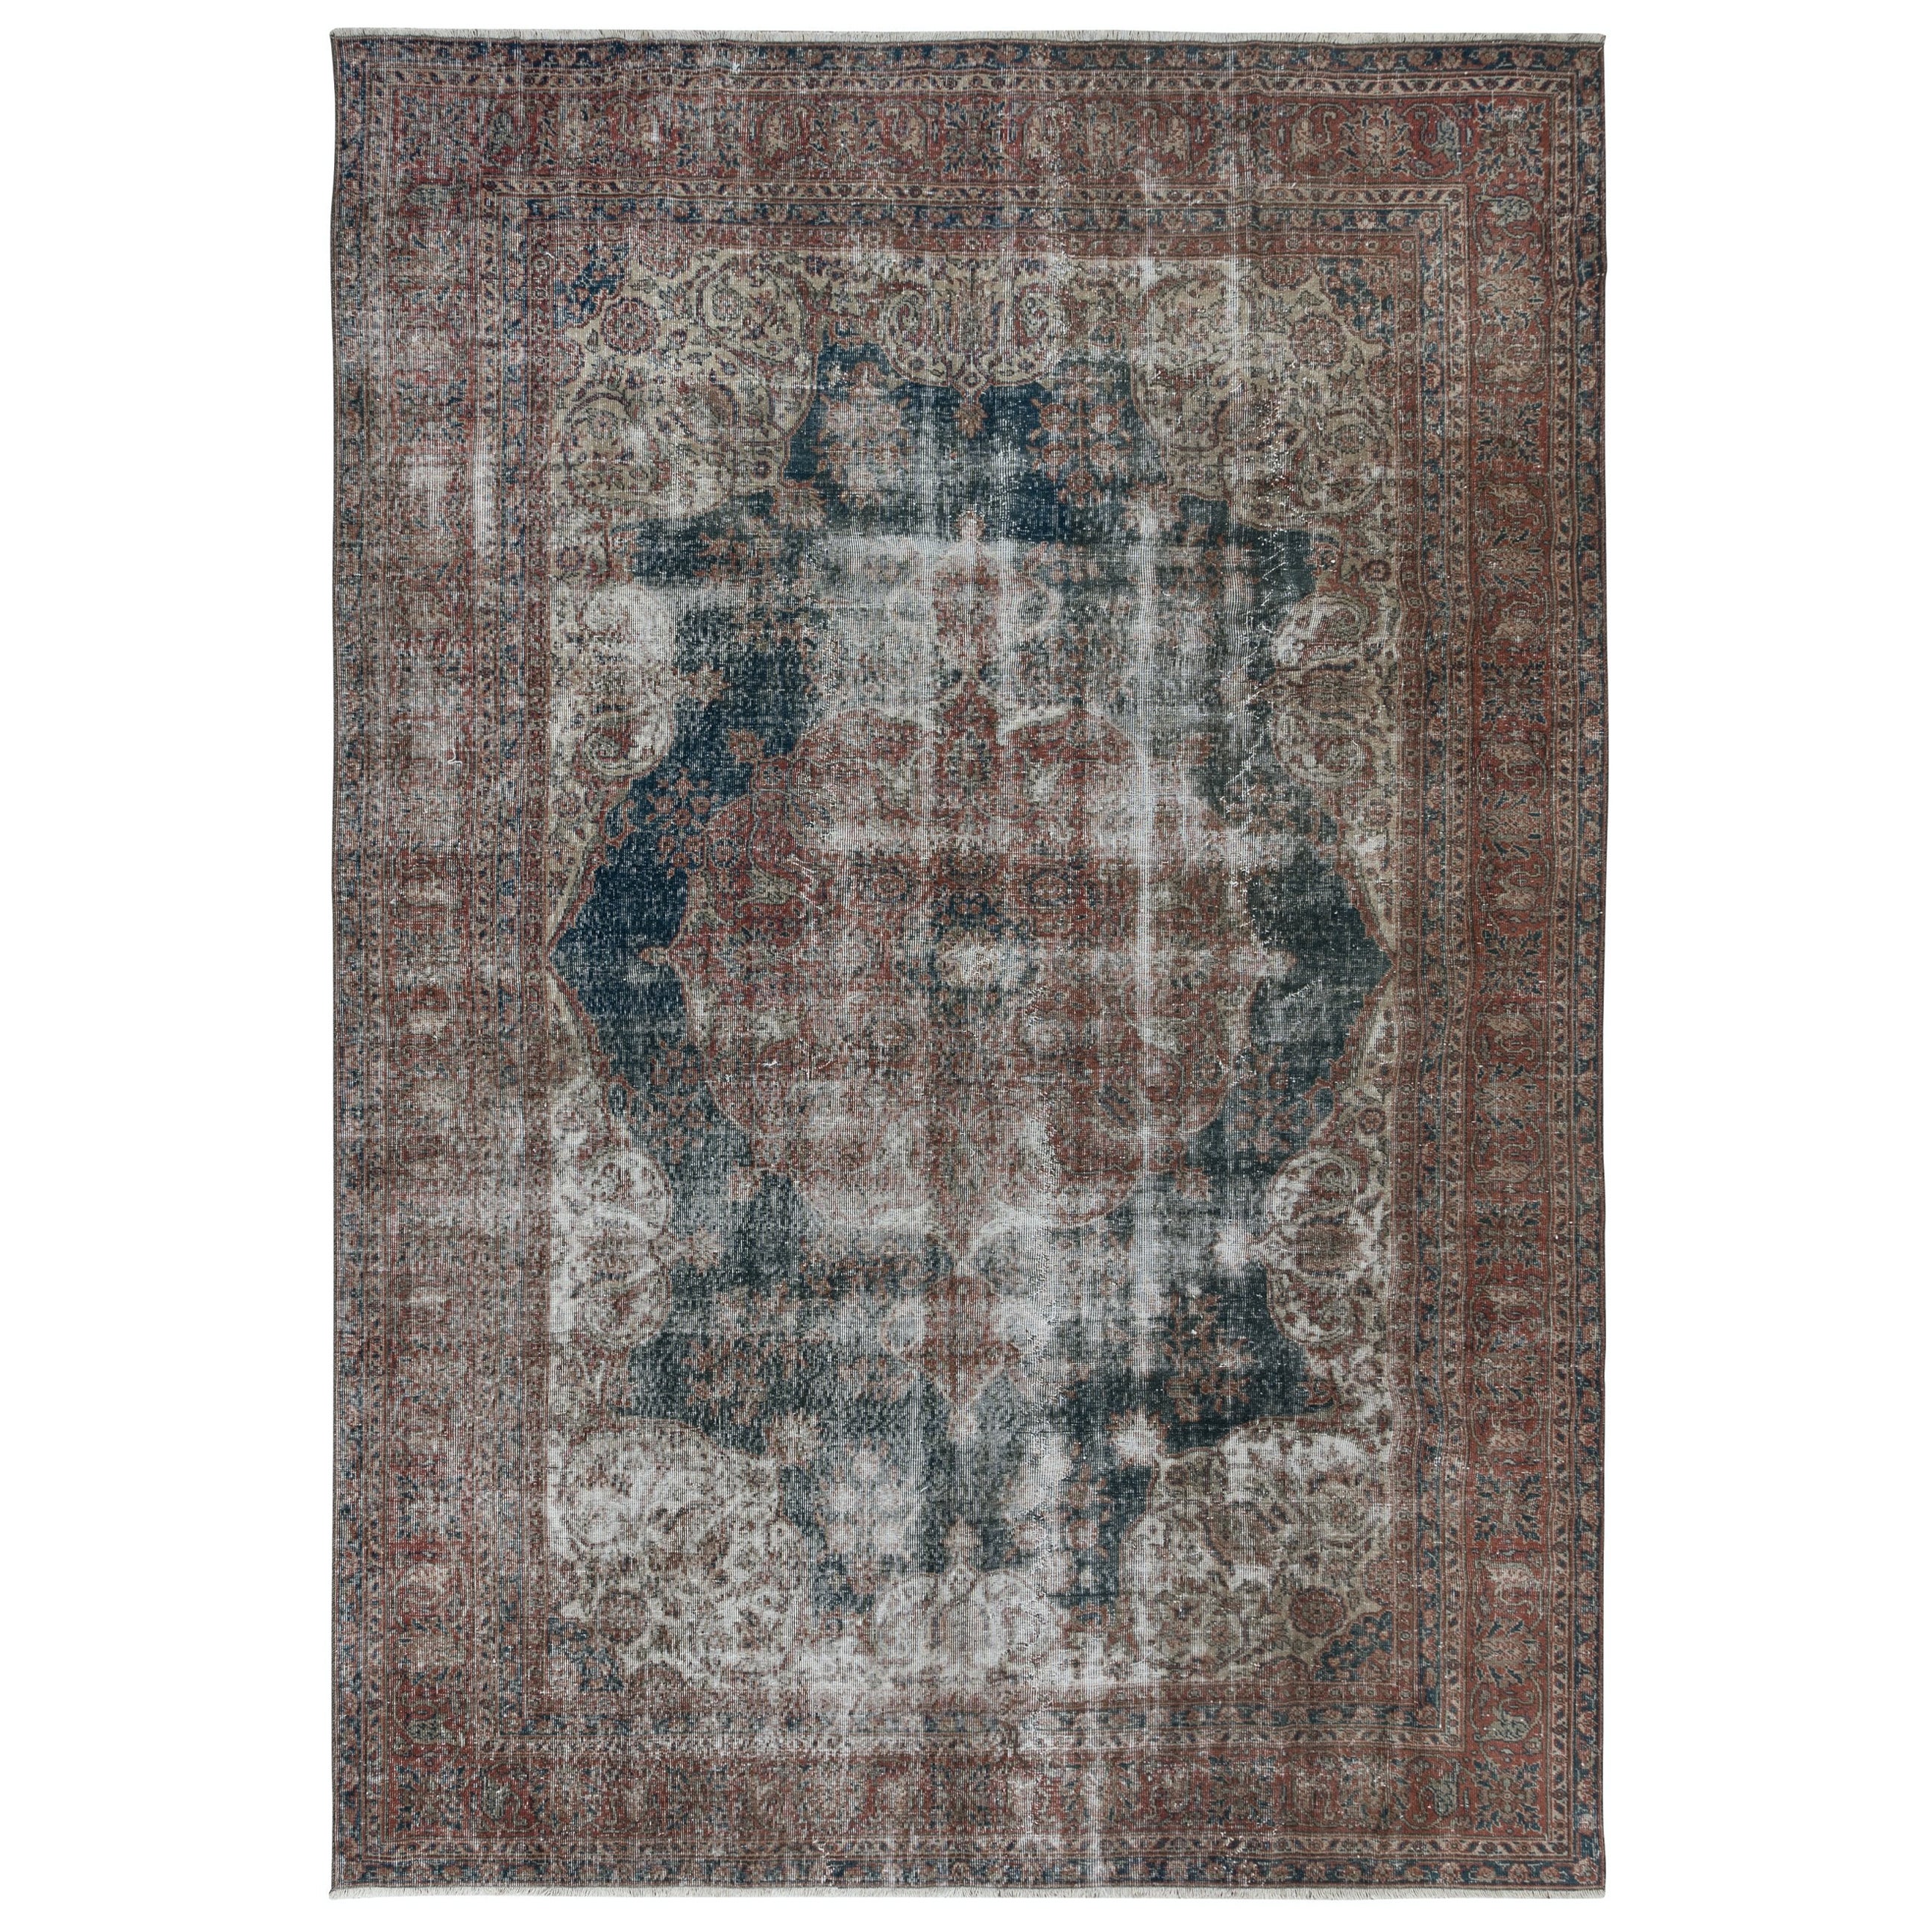 7.7x11 Ft One of a Kind Hand Knotted Turkish Vintage Shabby Chic Large Area Rug